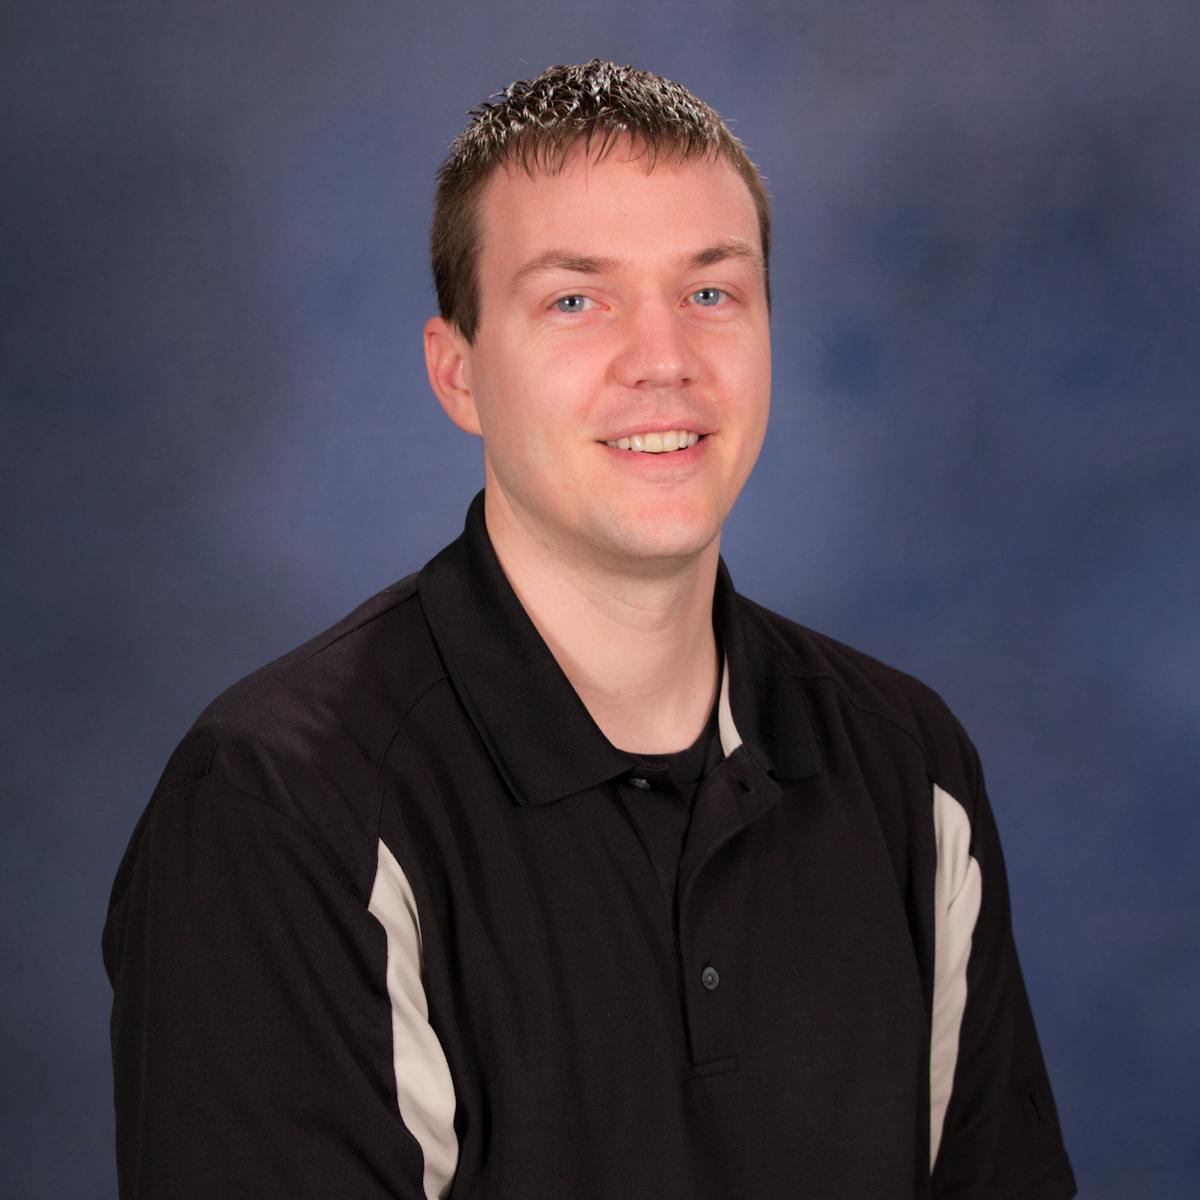 Bret Van Wyk is a program manager for Interstates Control Systems in Sioux Center, Iowa.